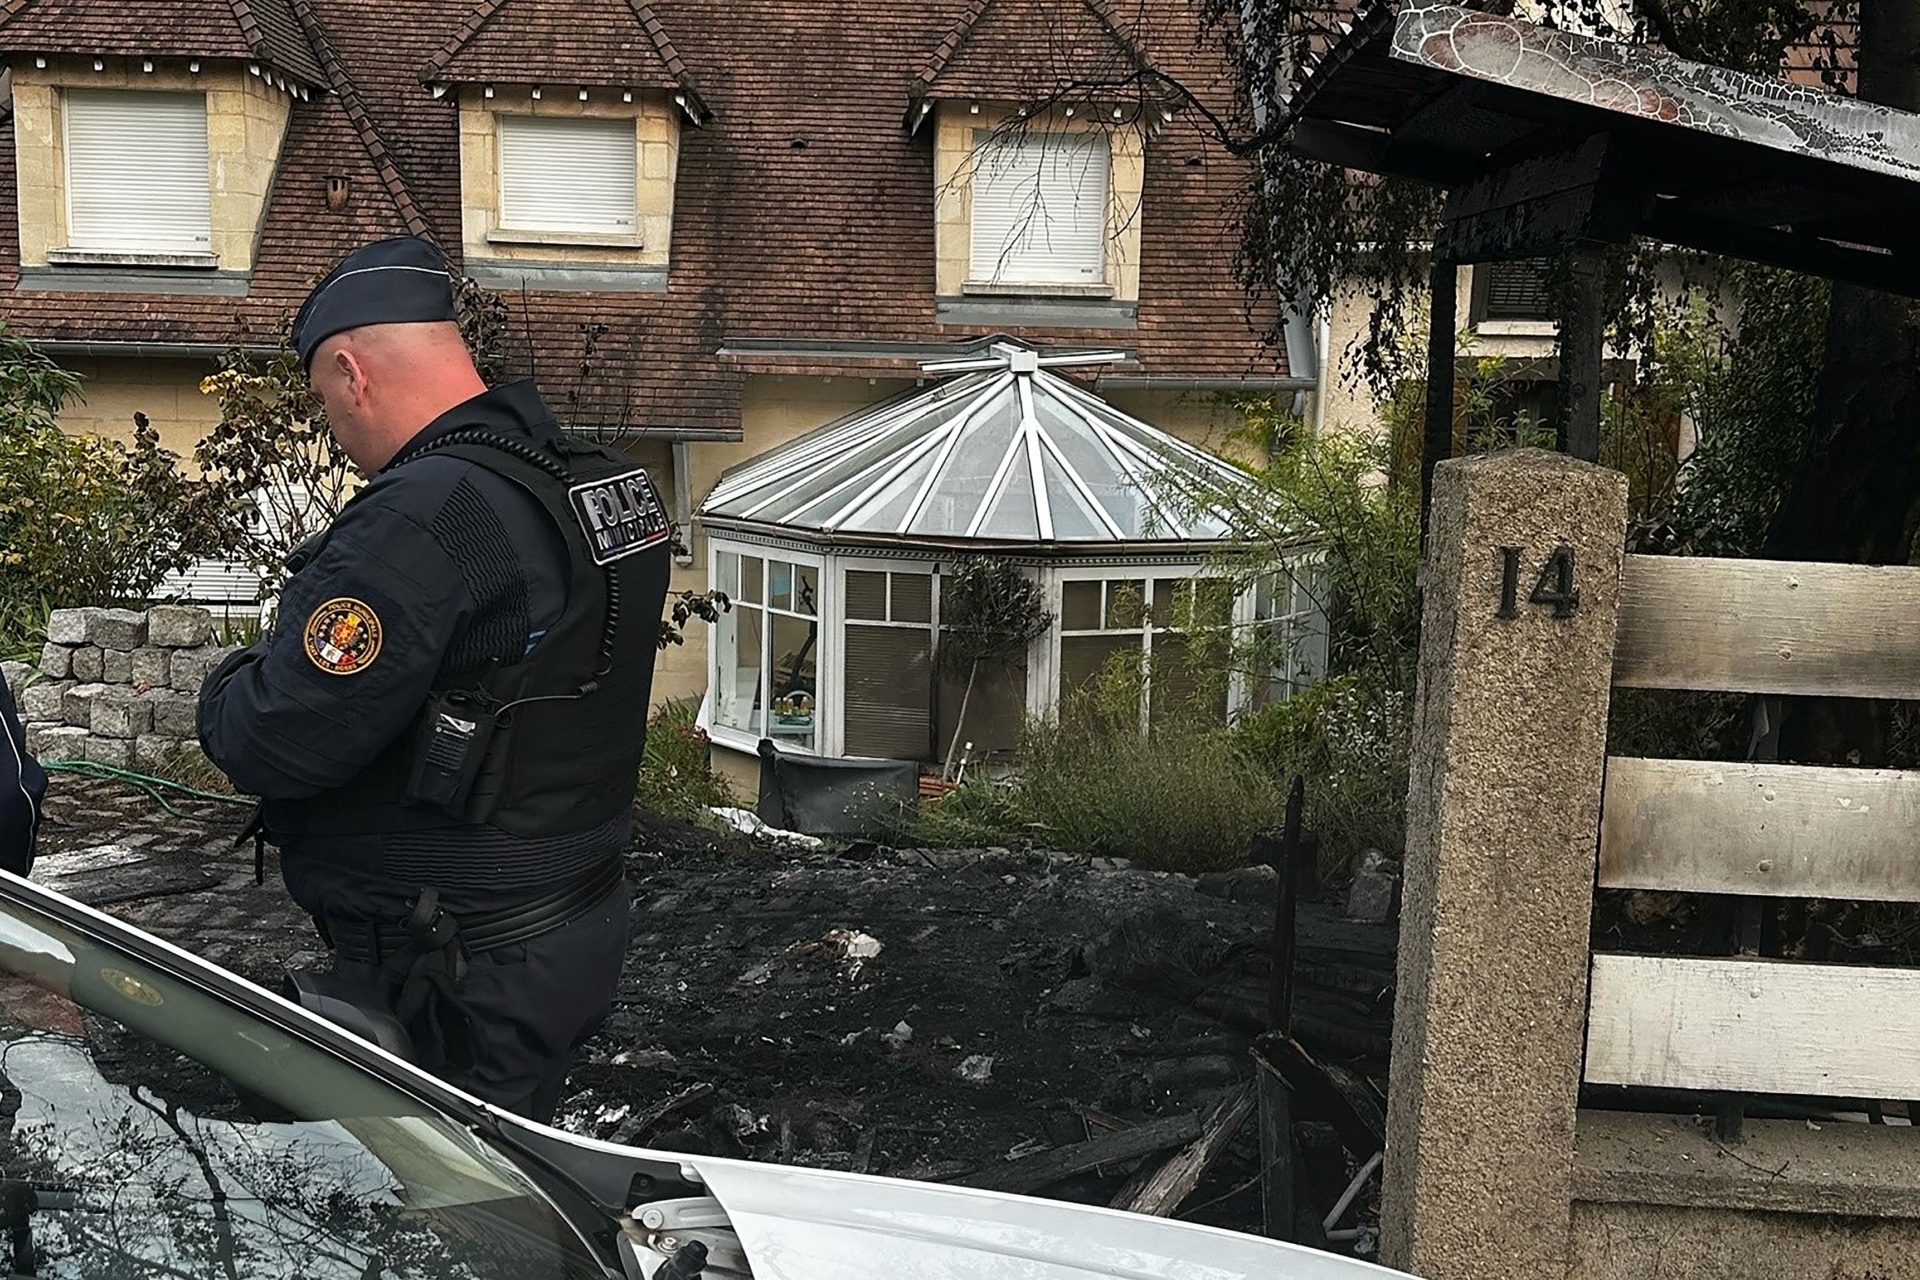 TOPSHOT - Municipal police officers stand in front of the damaged home of the Mayor of l'Hay-les-Roses Vincent Jeanbrun, in l'Hay-les-Roses, a suburb of Paris on July 2, 2023, after rioters rammed a vehicle into the building injuring the Mayor's wife and one of his children overnight, during continued disturbances across France after a 17-year-old man was killed by police in Nanterre, a western suburb of Paris on June 27. Rioters in France rammed a car into the home of the mayor of a town south of Paris, injuring his wife and one of his children, the mayor said July 2, 2023. (Photo by Nassim GOMRI / AFP) (Photo by NASSIM GOMRI/AFP via Getty Images)